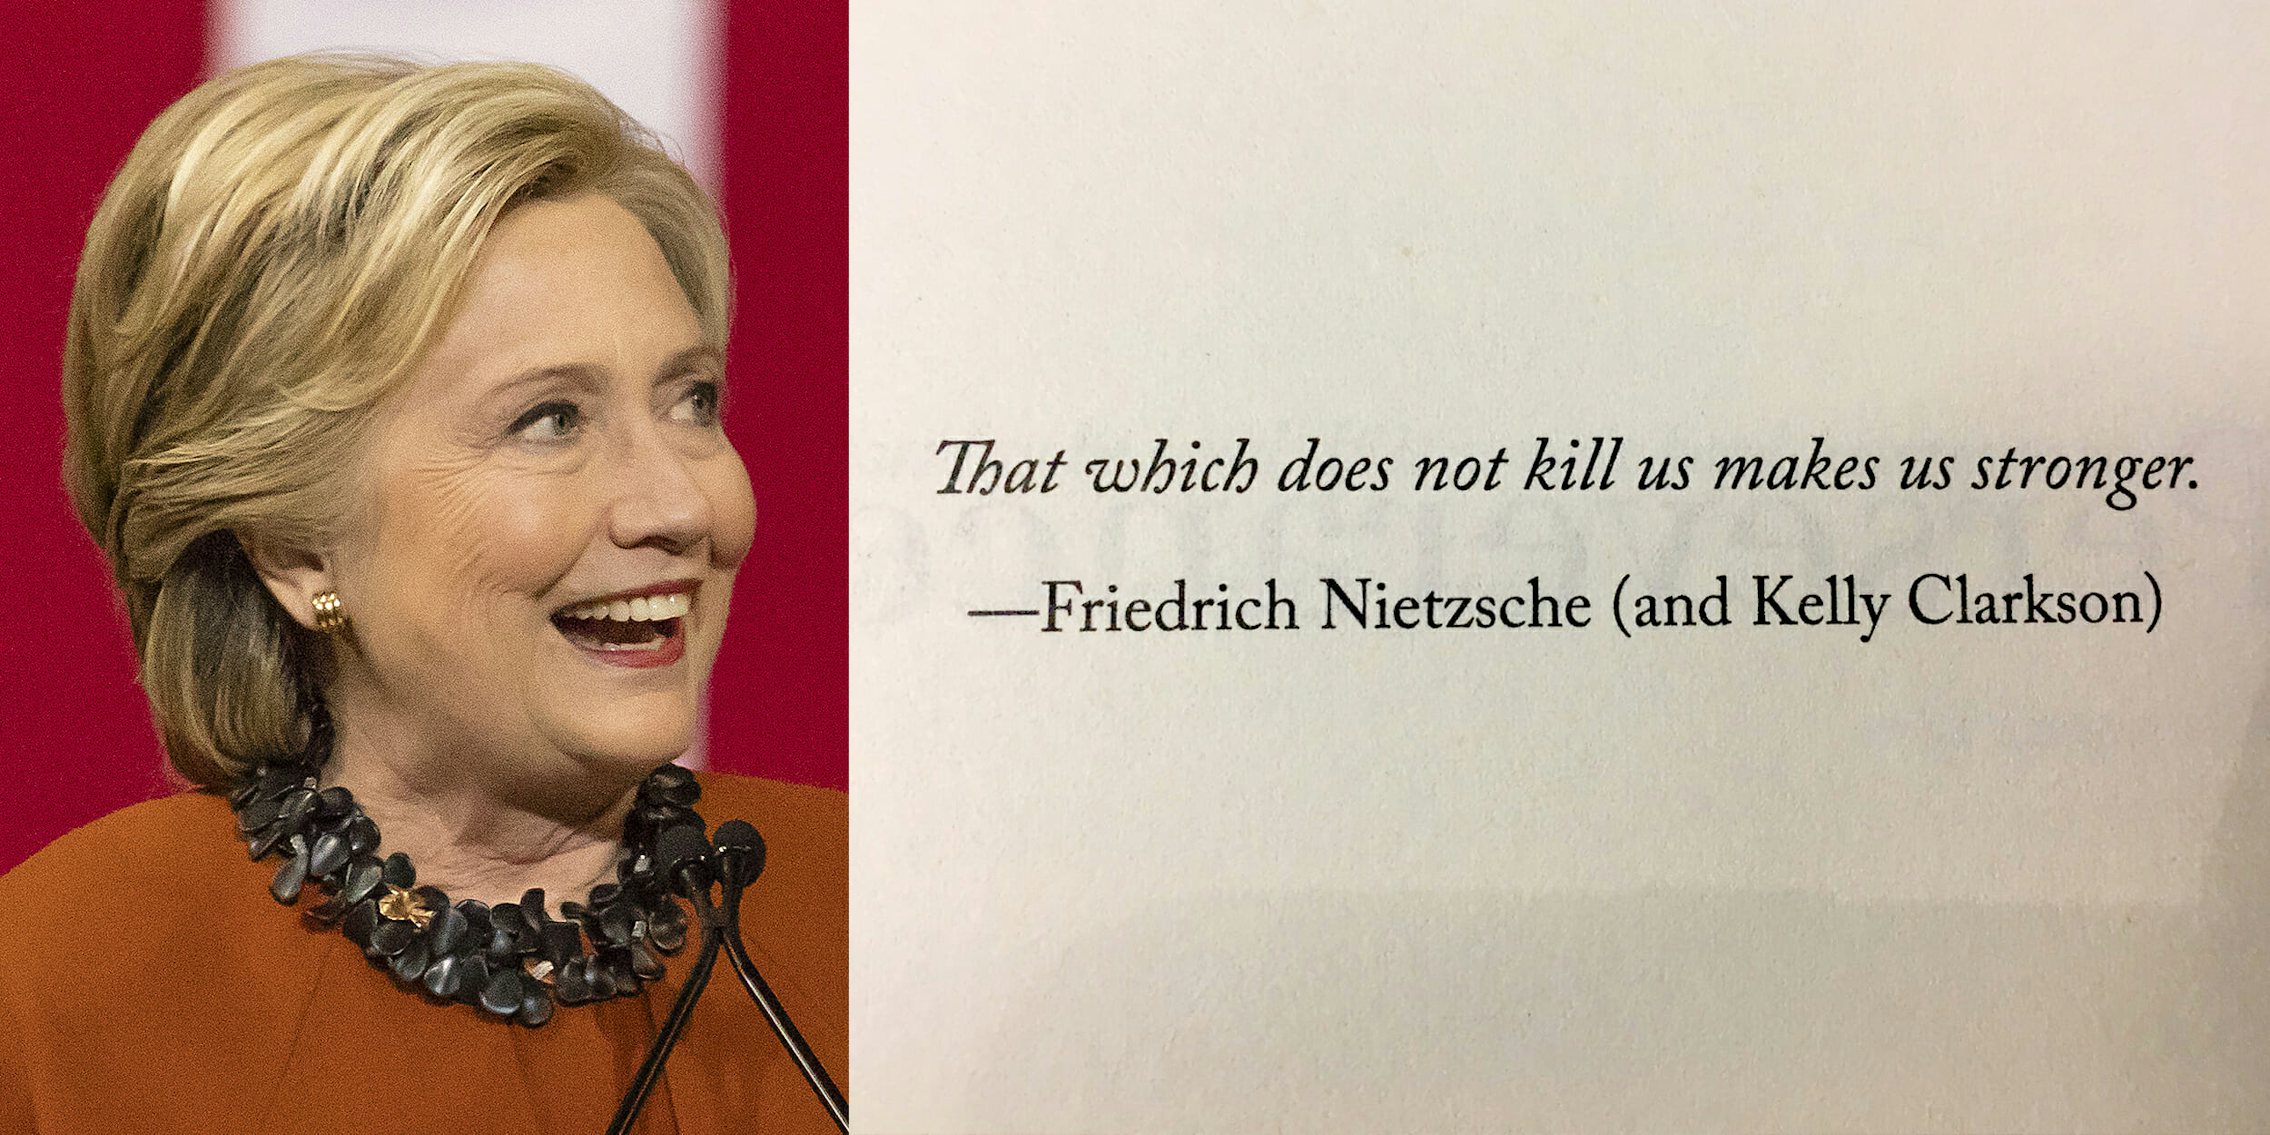 Hillary Clinton with 'That which does not kill us makes us stronger. - Friedrich Nietzsche (and Kelly Clarkson)' quote